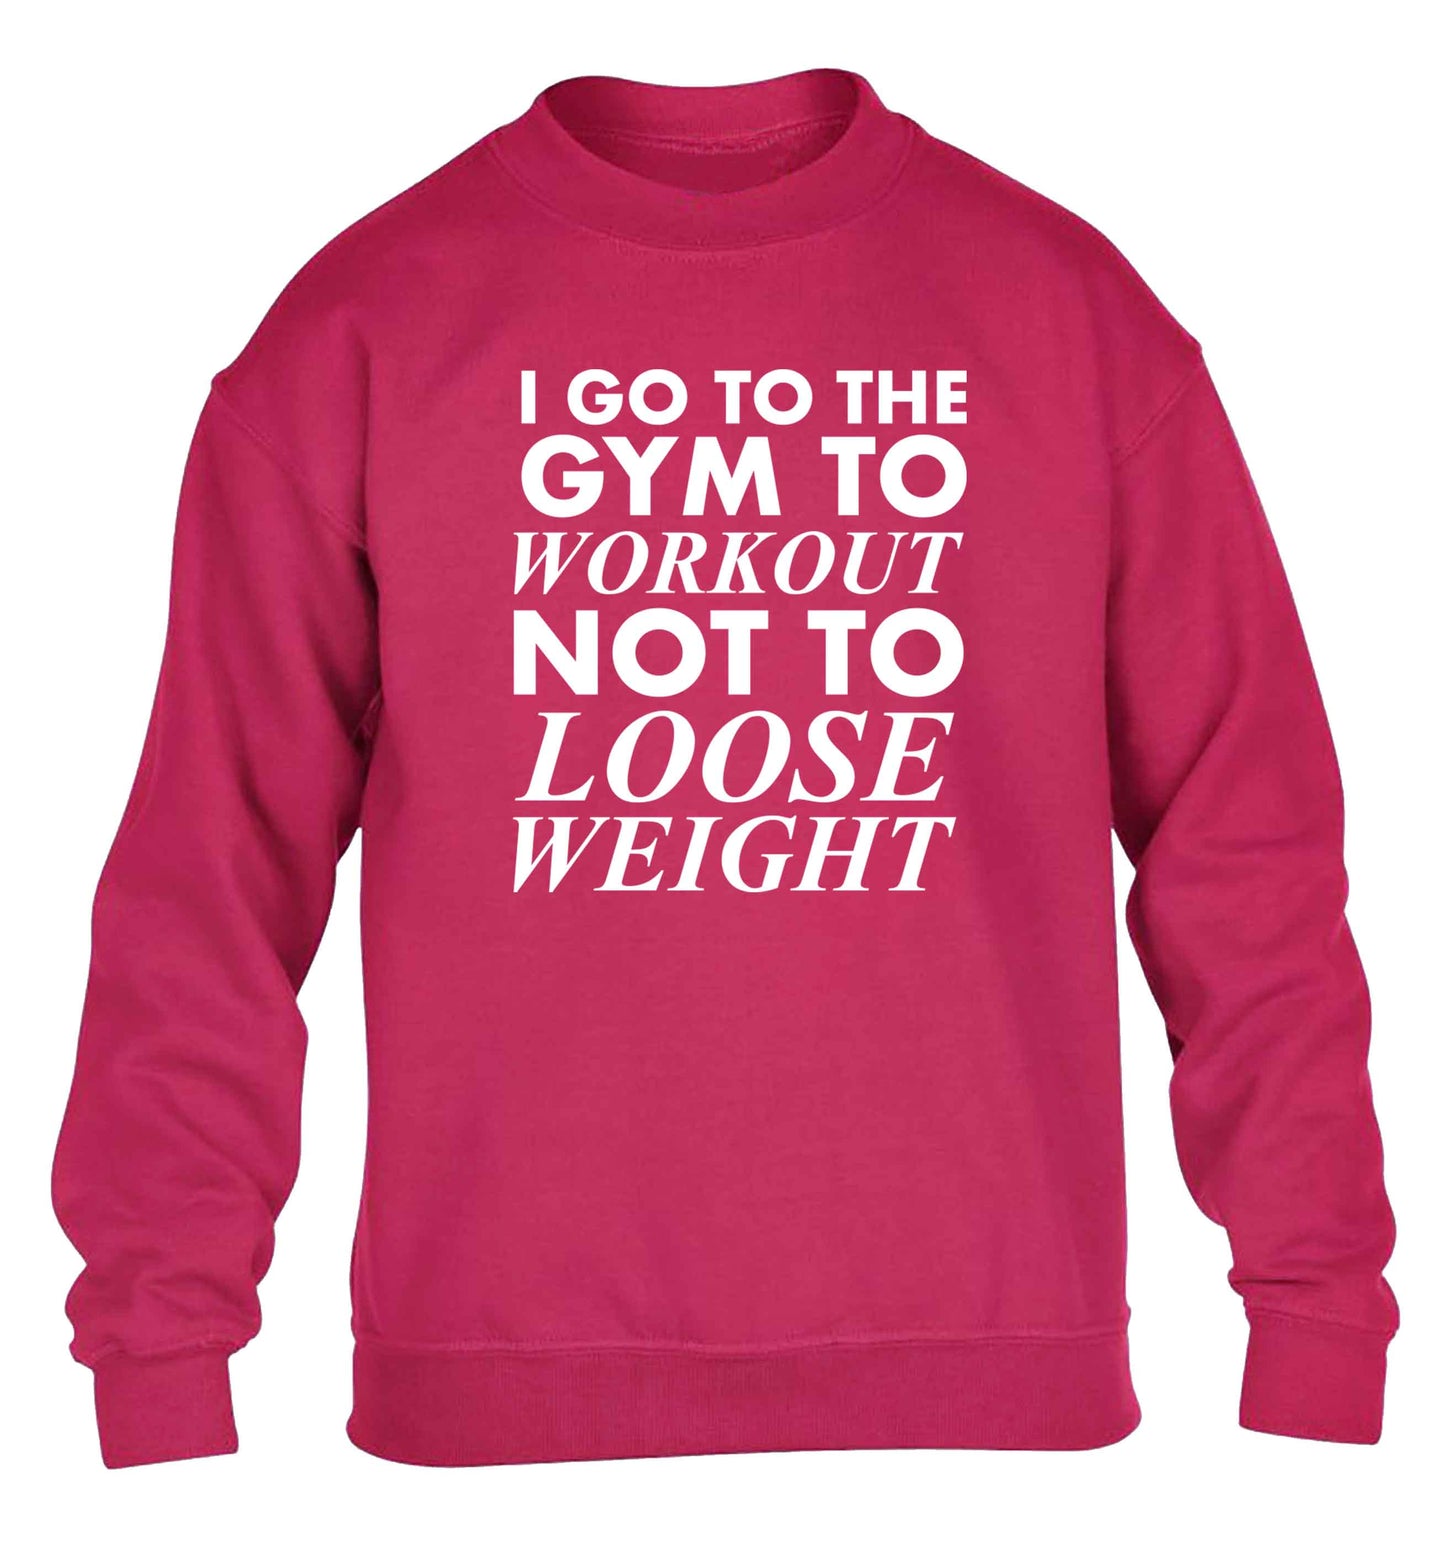 I go to the gym to workout not to loose weight children's pink sweater 12-13 Years